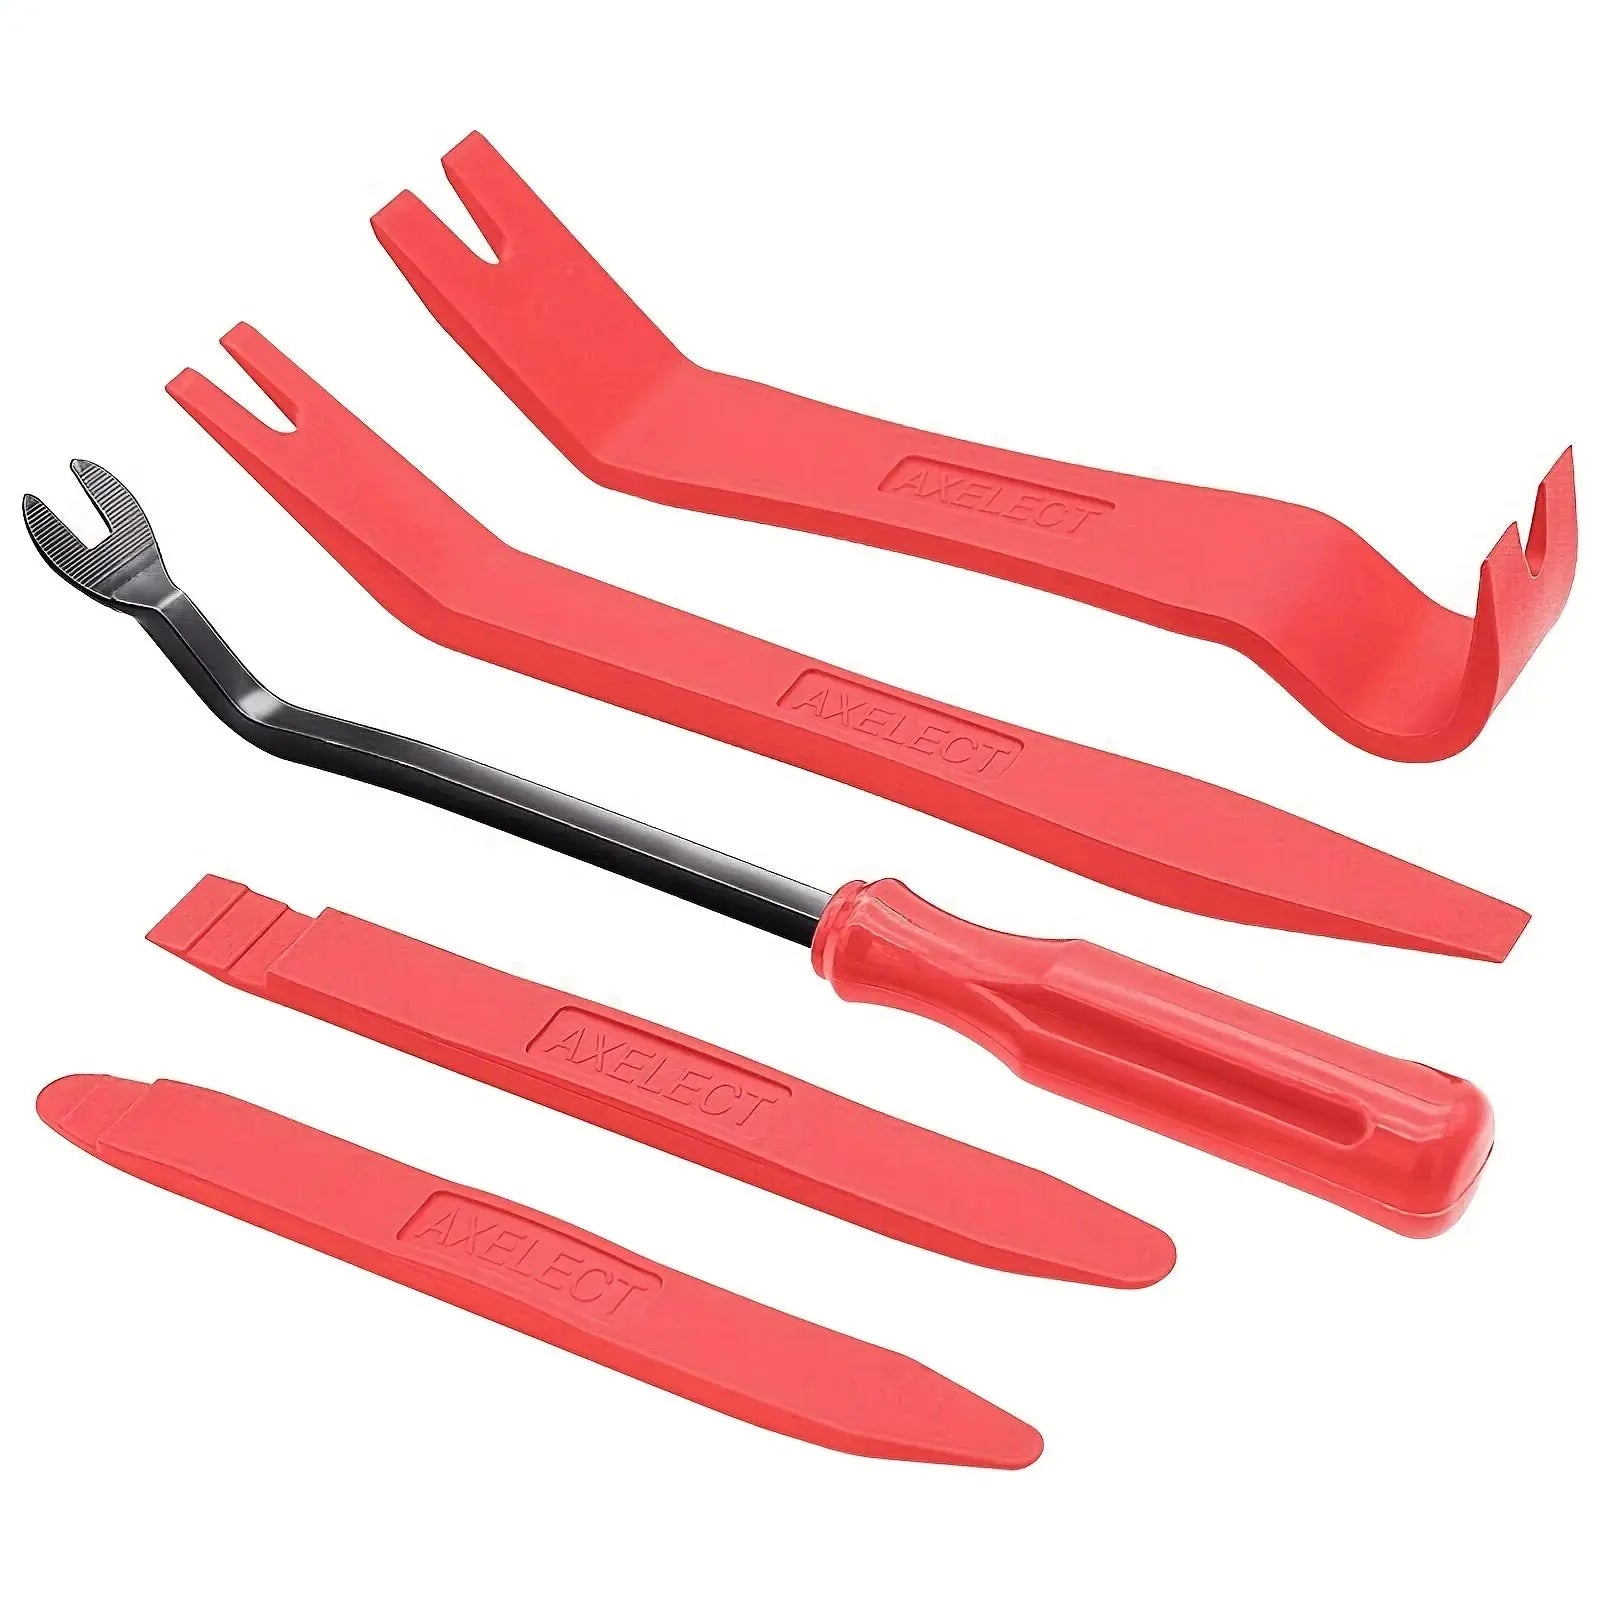 5PCS Nylon Auto Trim Removal Tool Kit No-Scratch Pry Tool Kit For Car Door Clip Panel & Audio Dashboard Dismantle Red BrothersCarCare